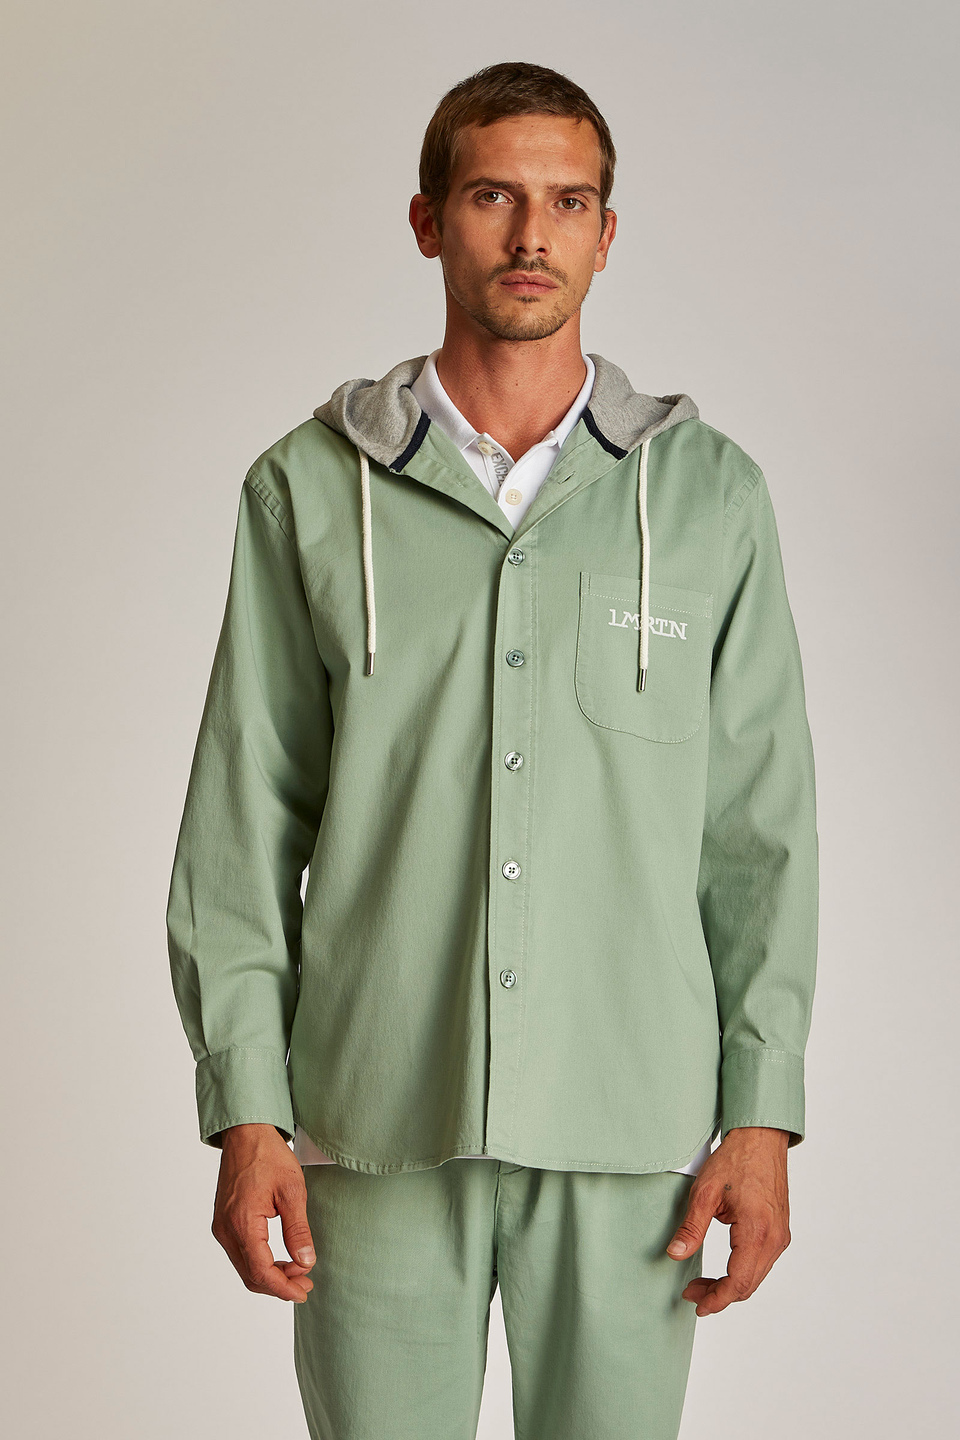 Men's oversized hooded jacket in 100% cotton fabric - La Martina - Official Online Shop